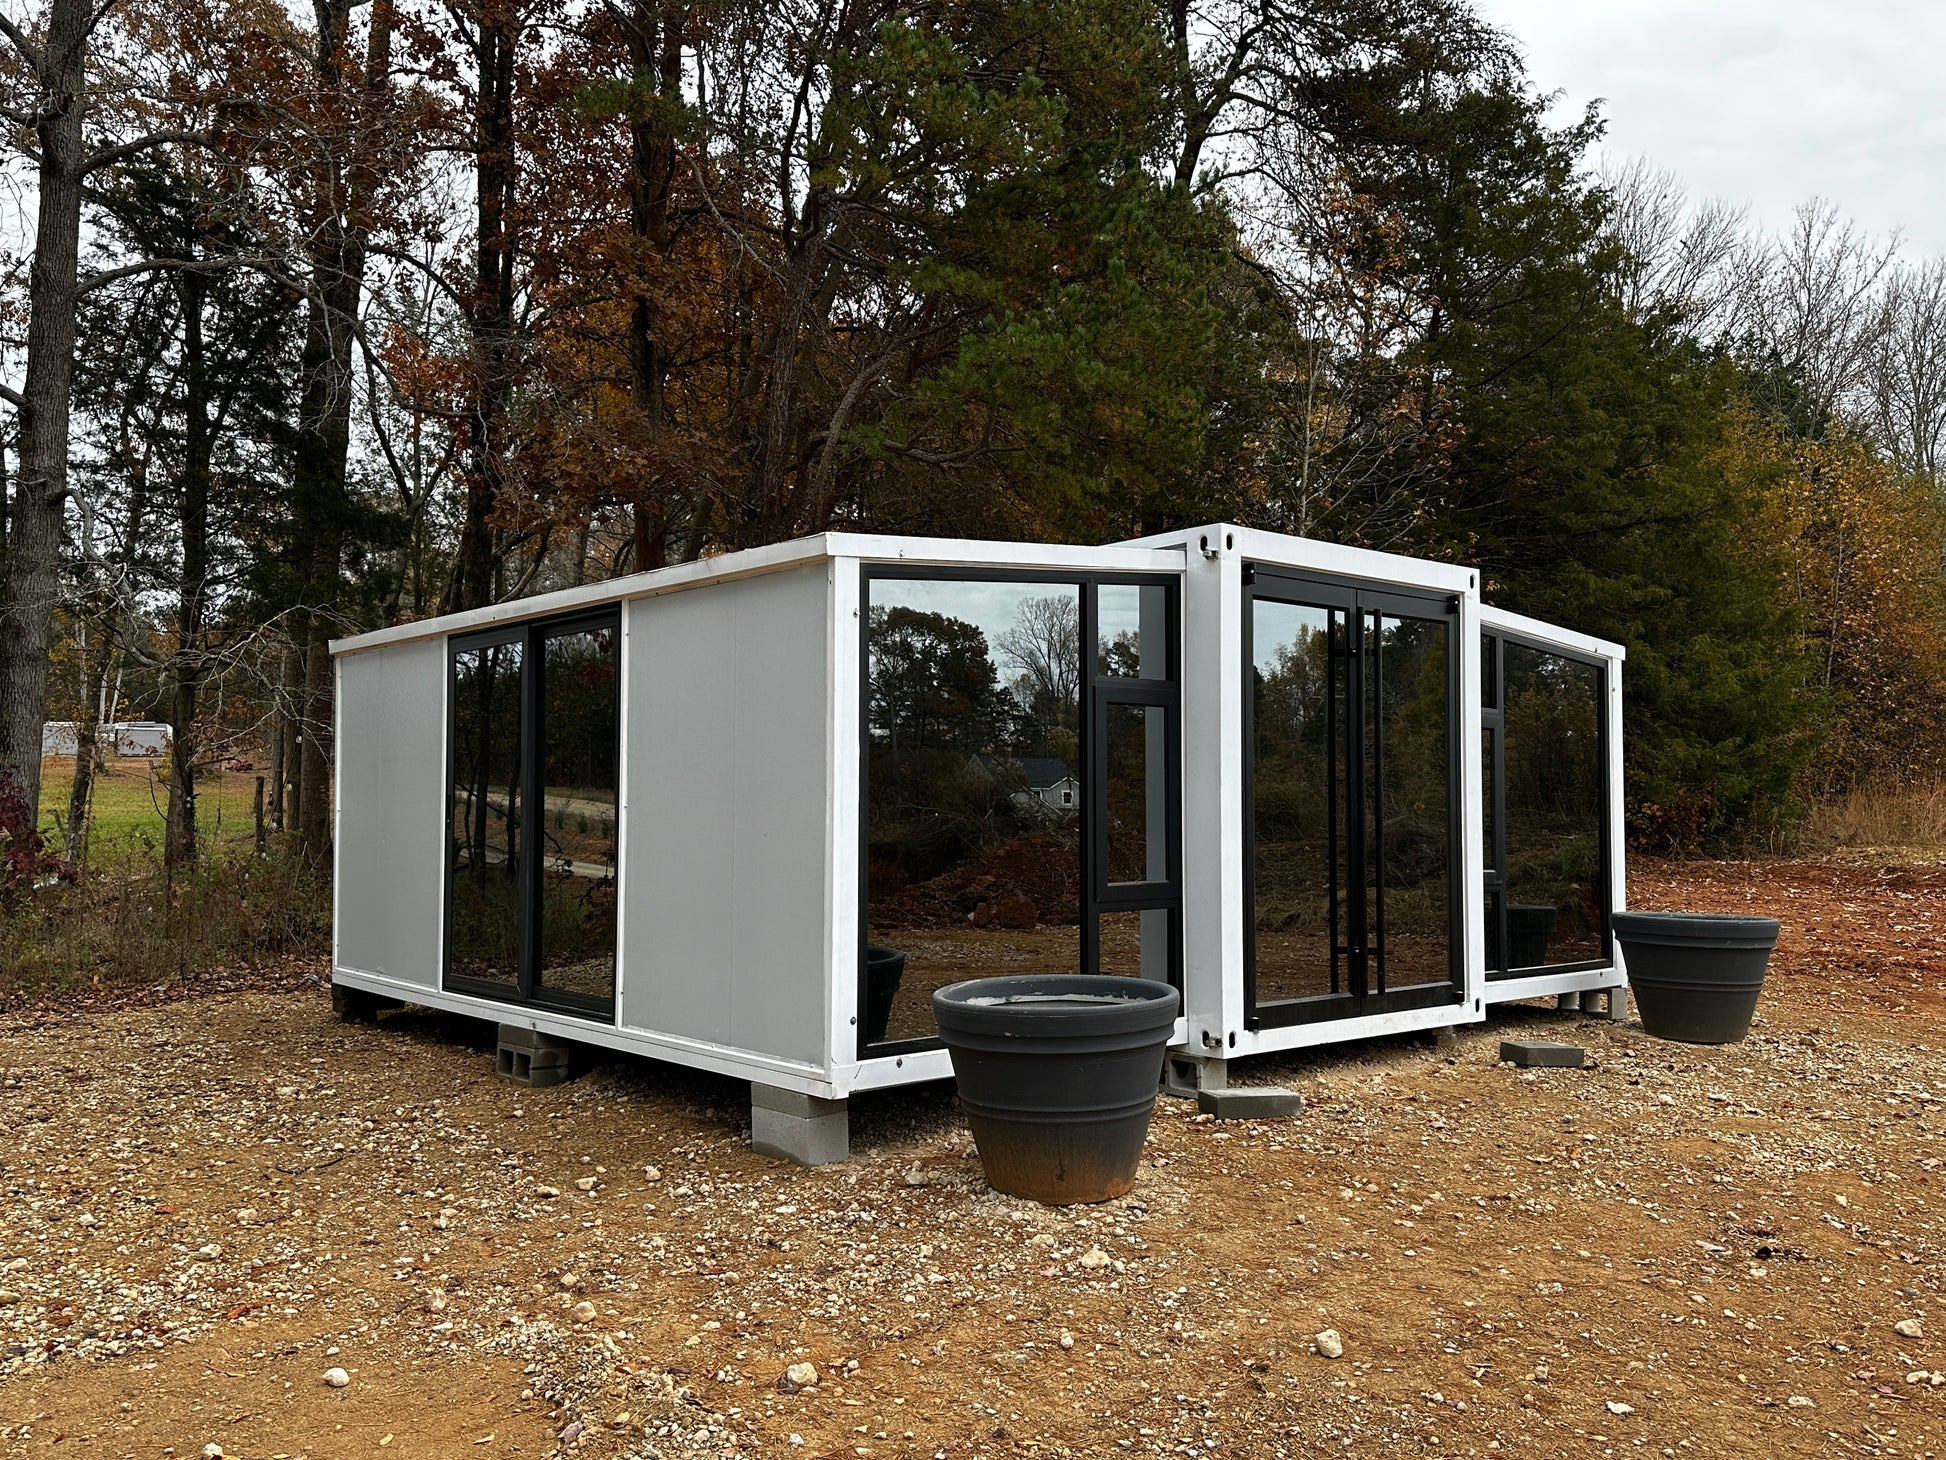 What areas can Expandable Container house be used in ？